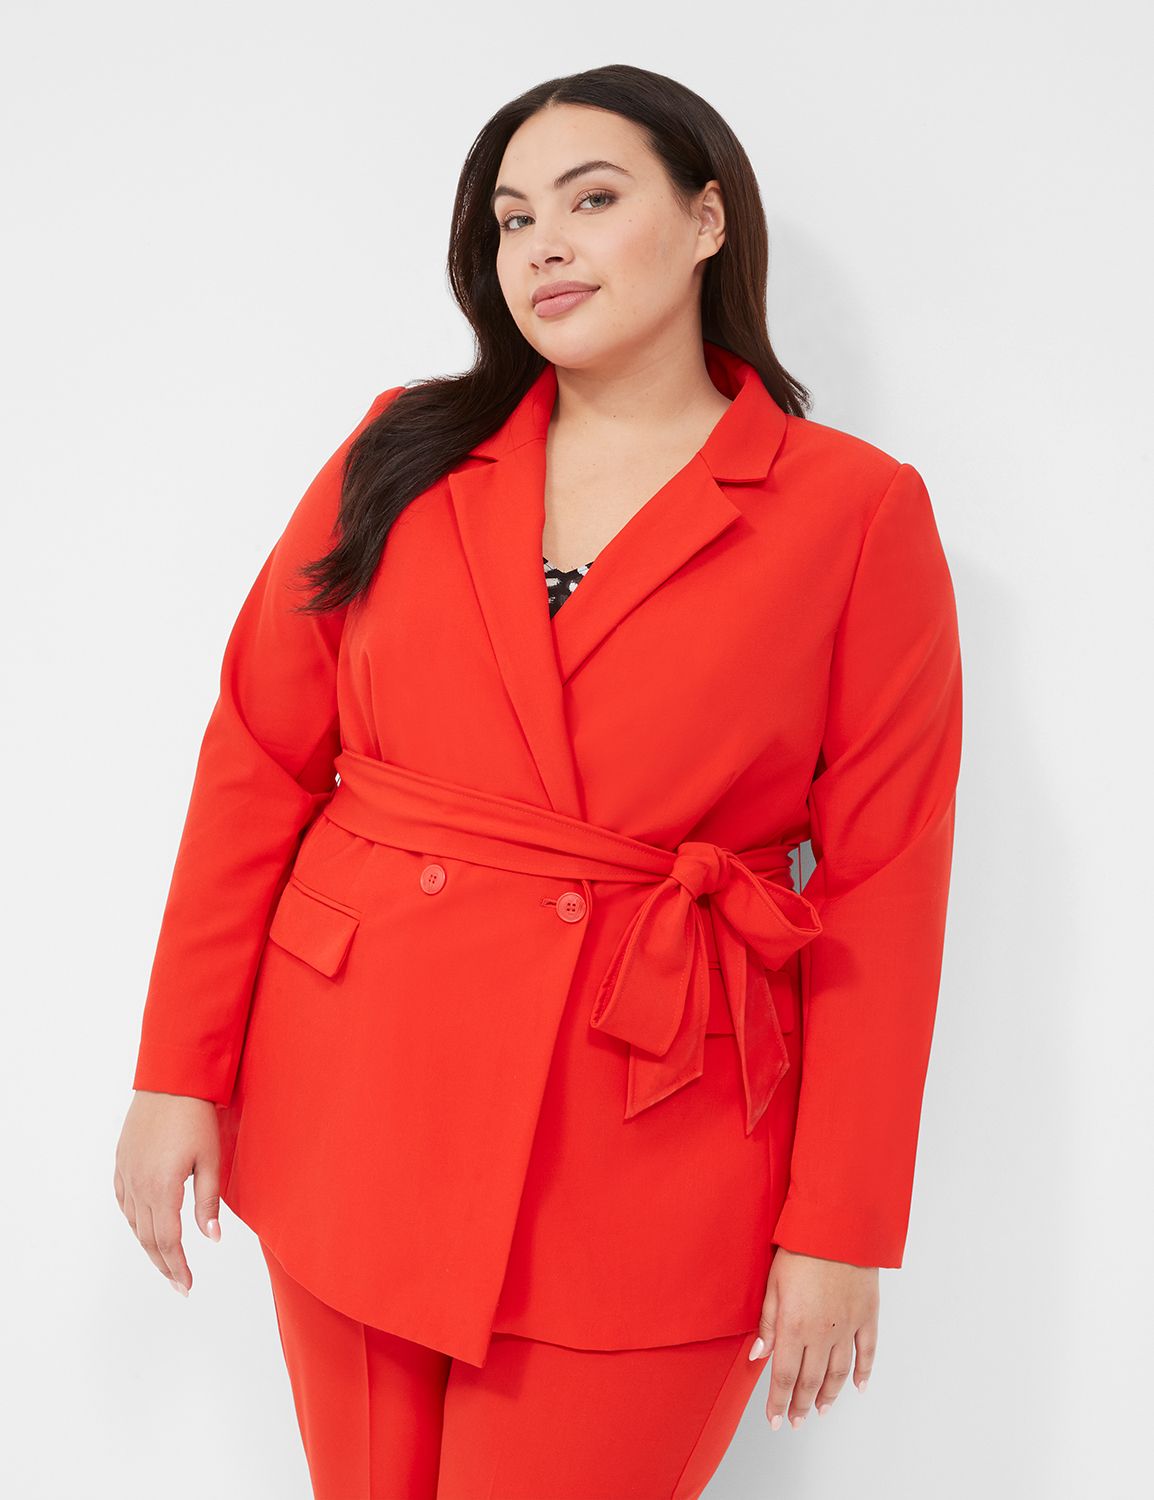 Deals of the Week ! BVnarty Discount Women's Jacket Coat Shacket Jacket  Casual Stand Collar Lightweight Leisure Office Suit Outerwear Winter  Fashion Top Plus Size Long Sleeve Solid Color Orange L 